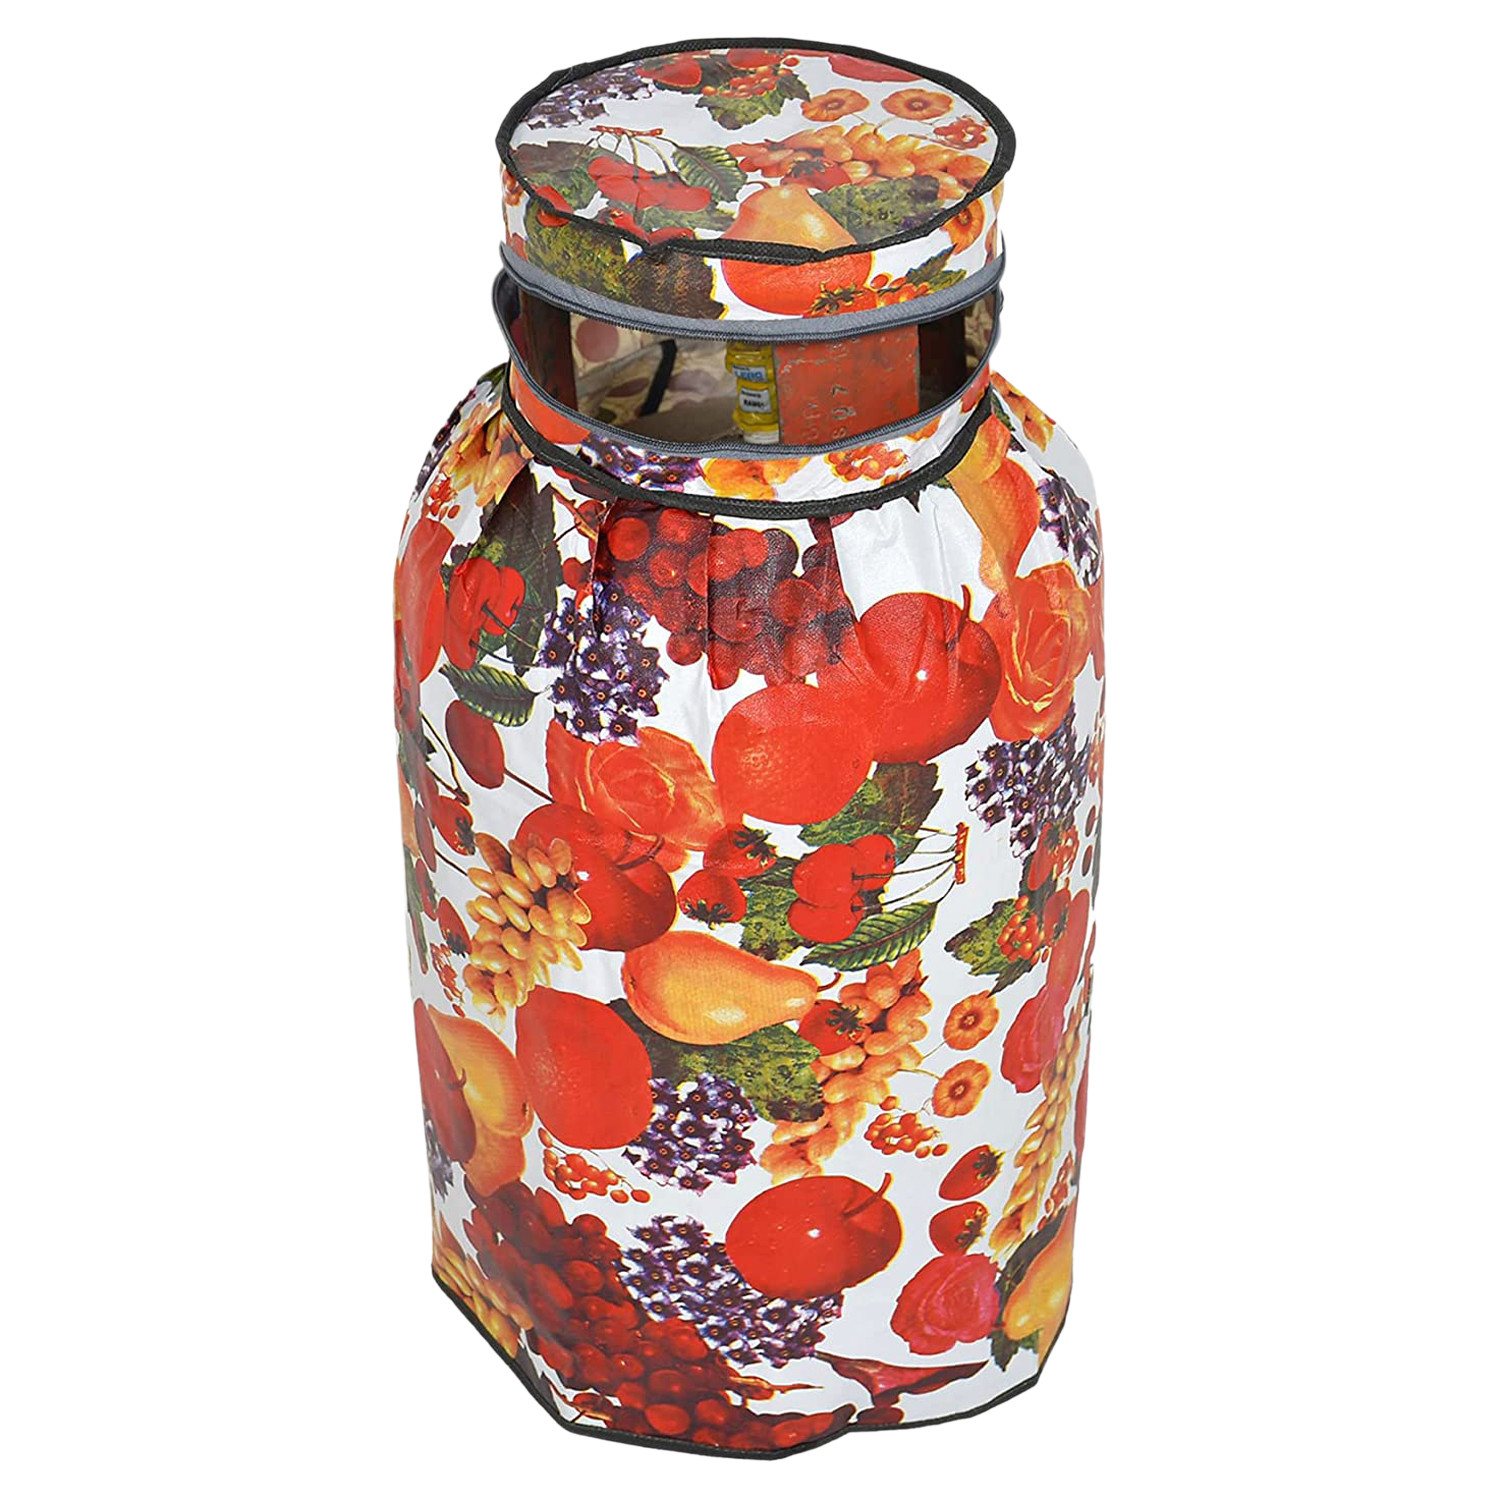 Kuber Industries PVC Fruits Print Waterproof and Dustproof Cylinder Cover For Home & Kitchen (Red)